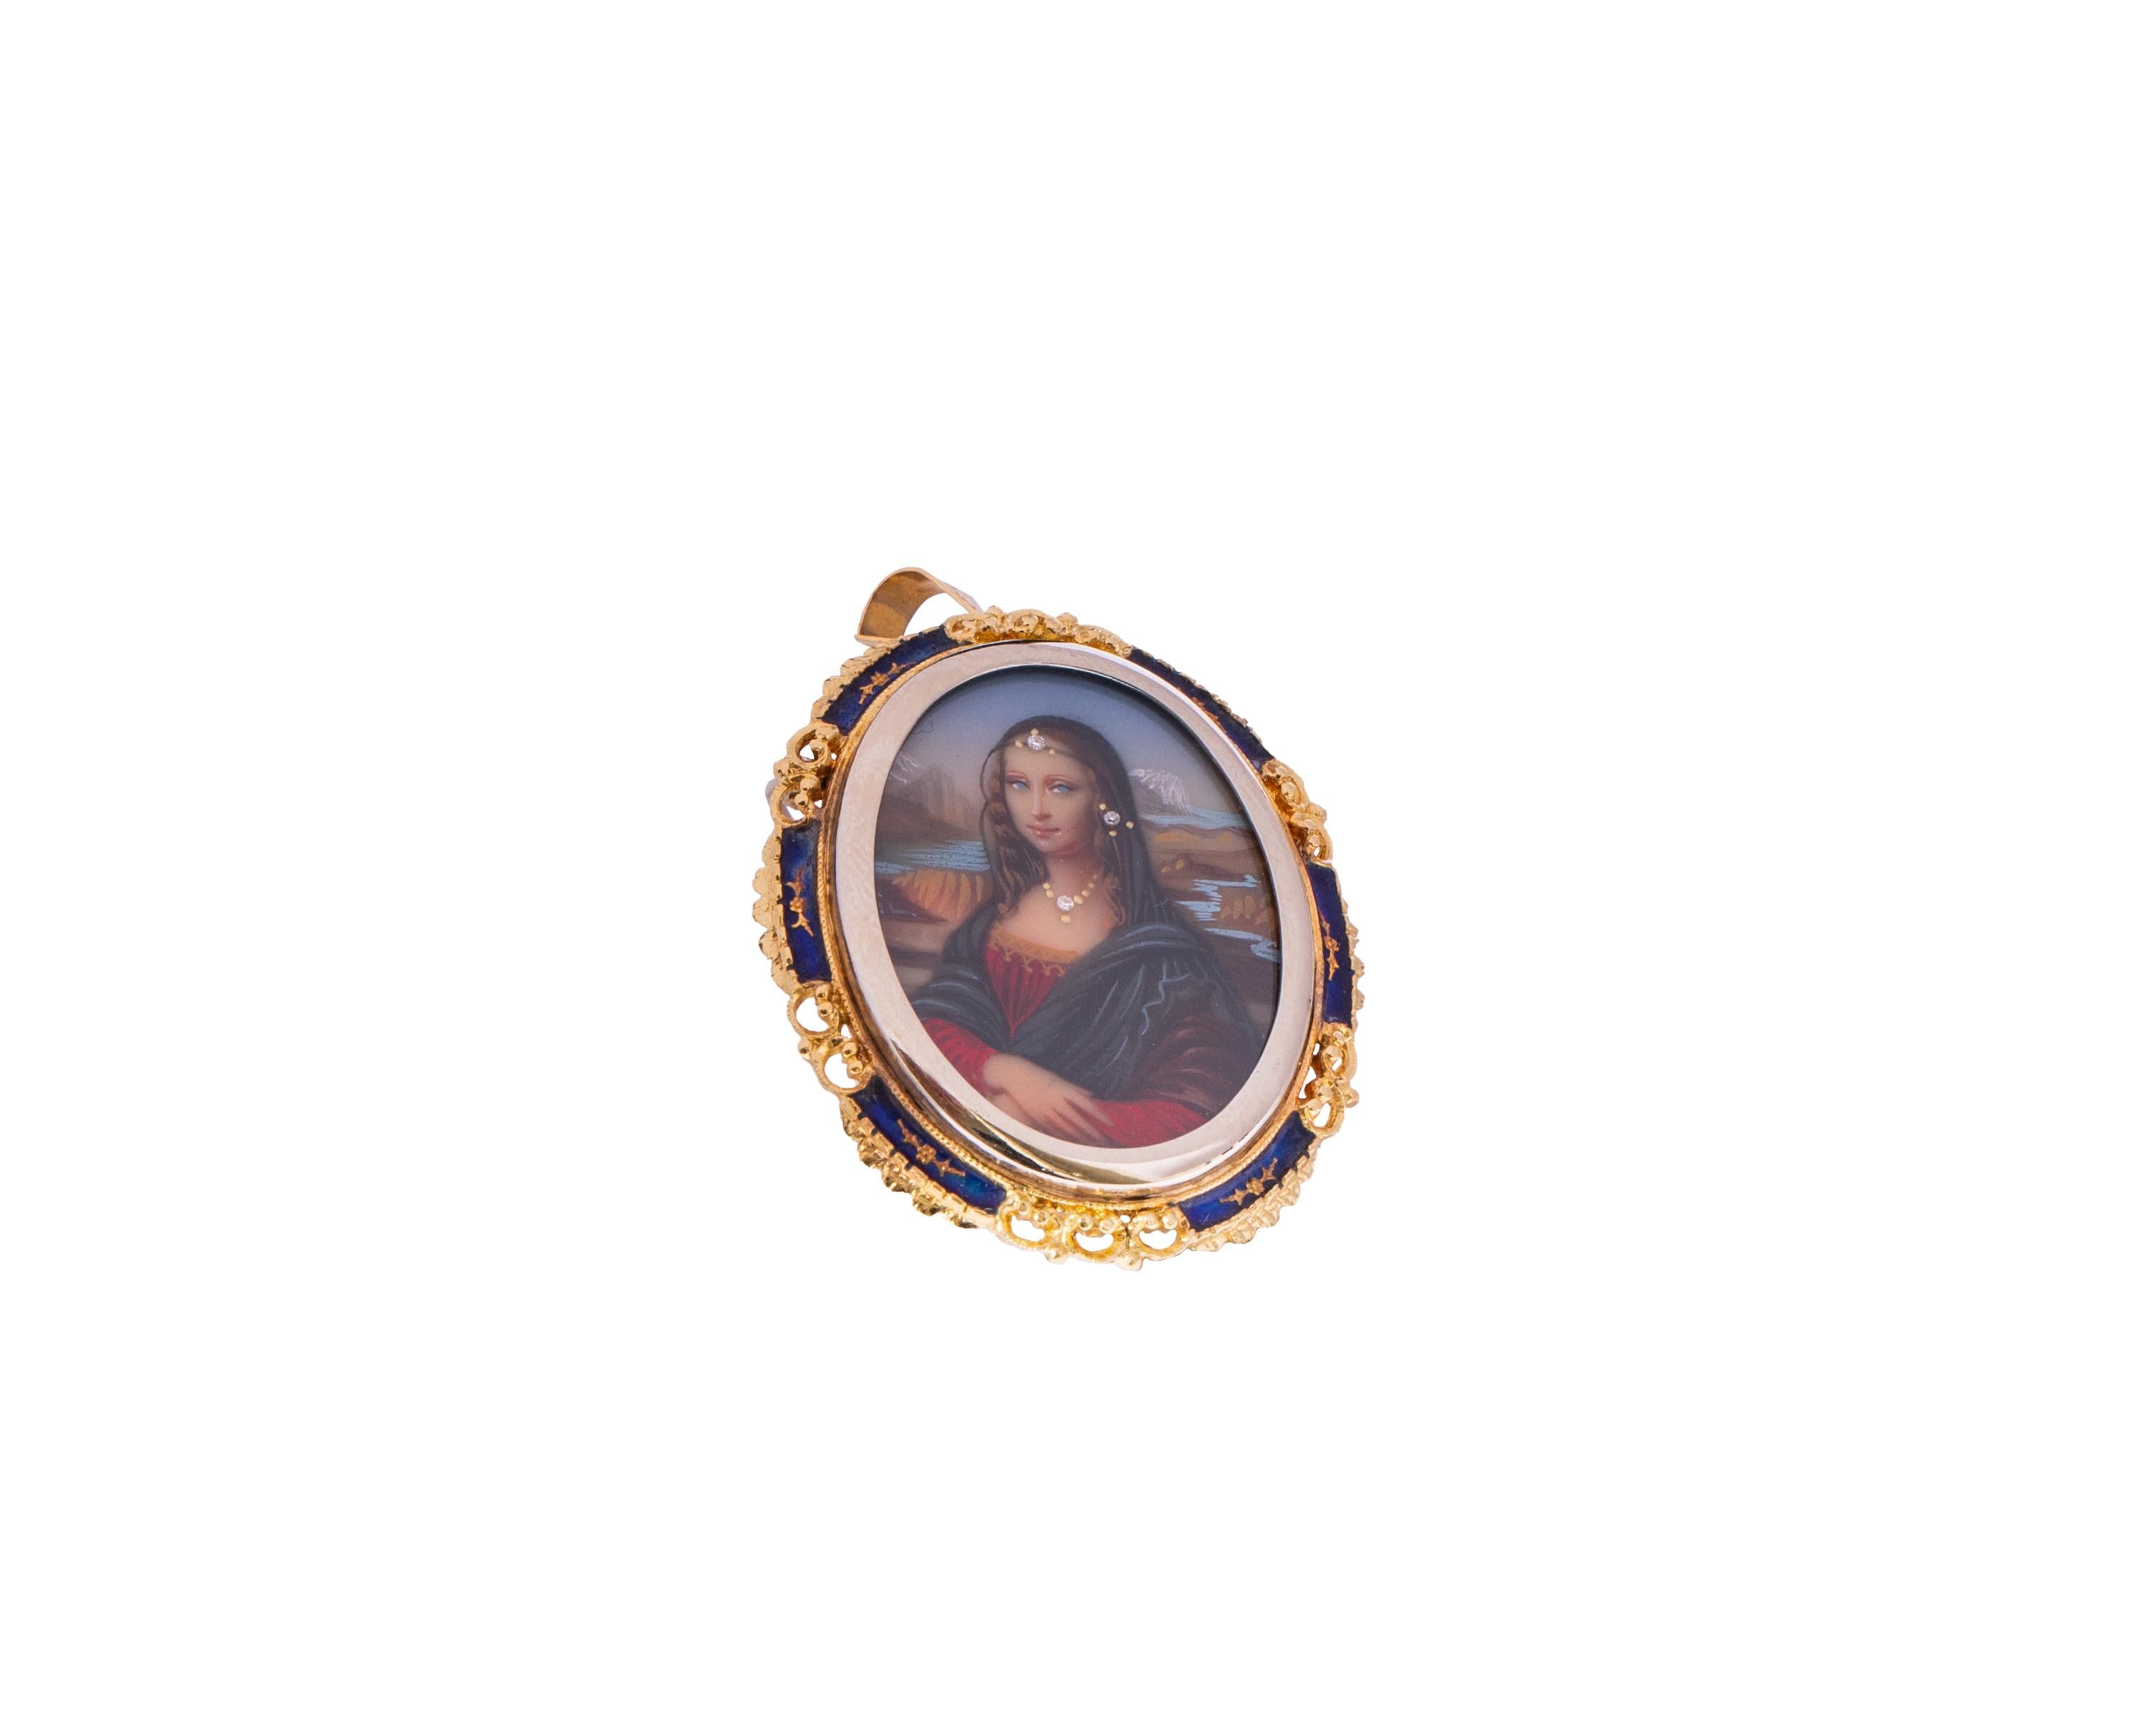 Retro 1950s Hand Painted Portrait, 18 Karat Gold and Blue Enamel, Made in Italy